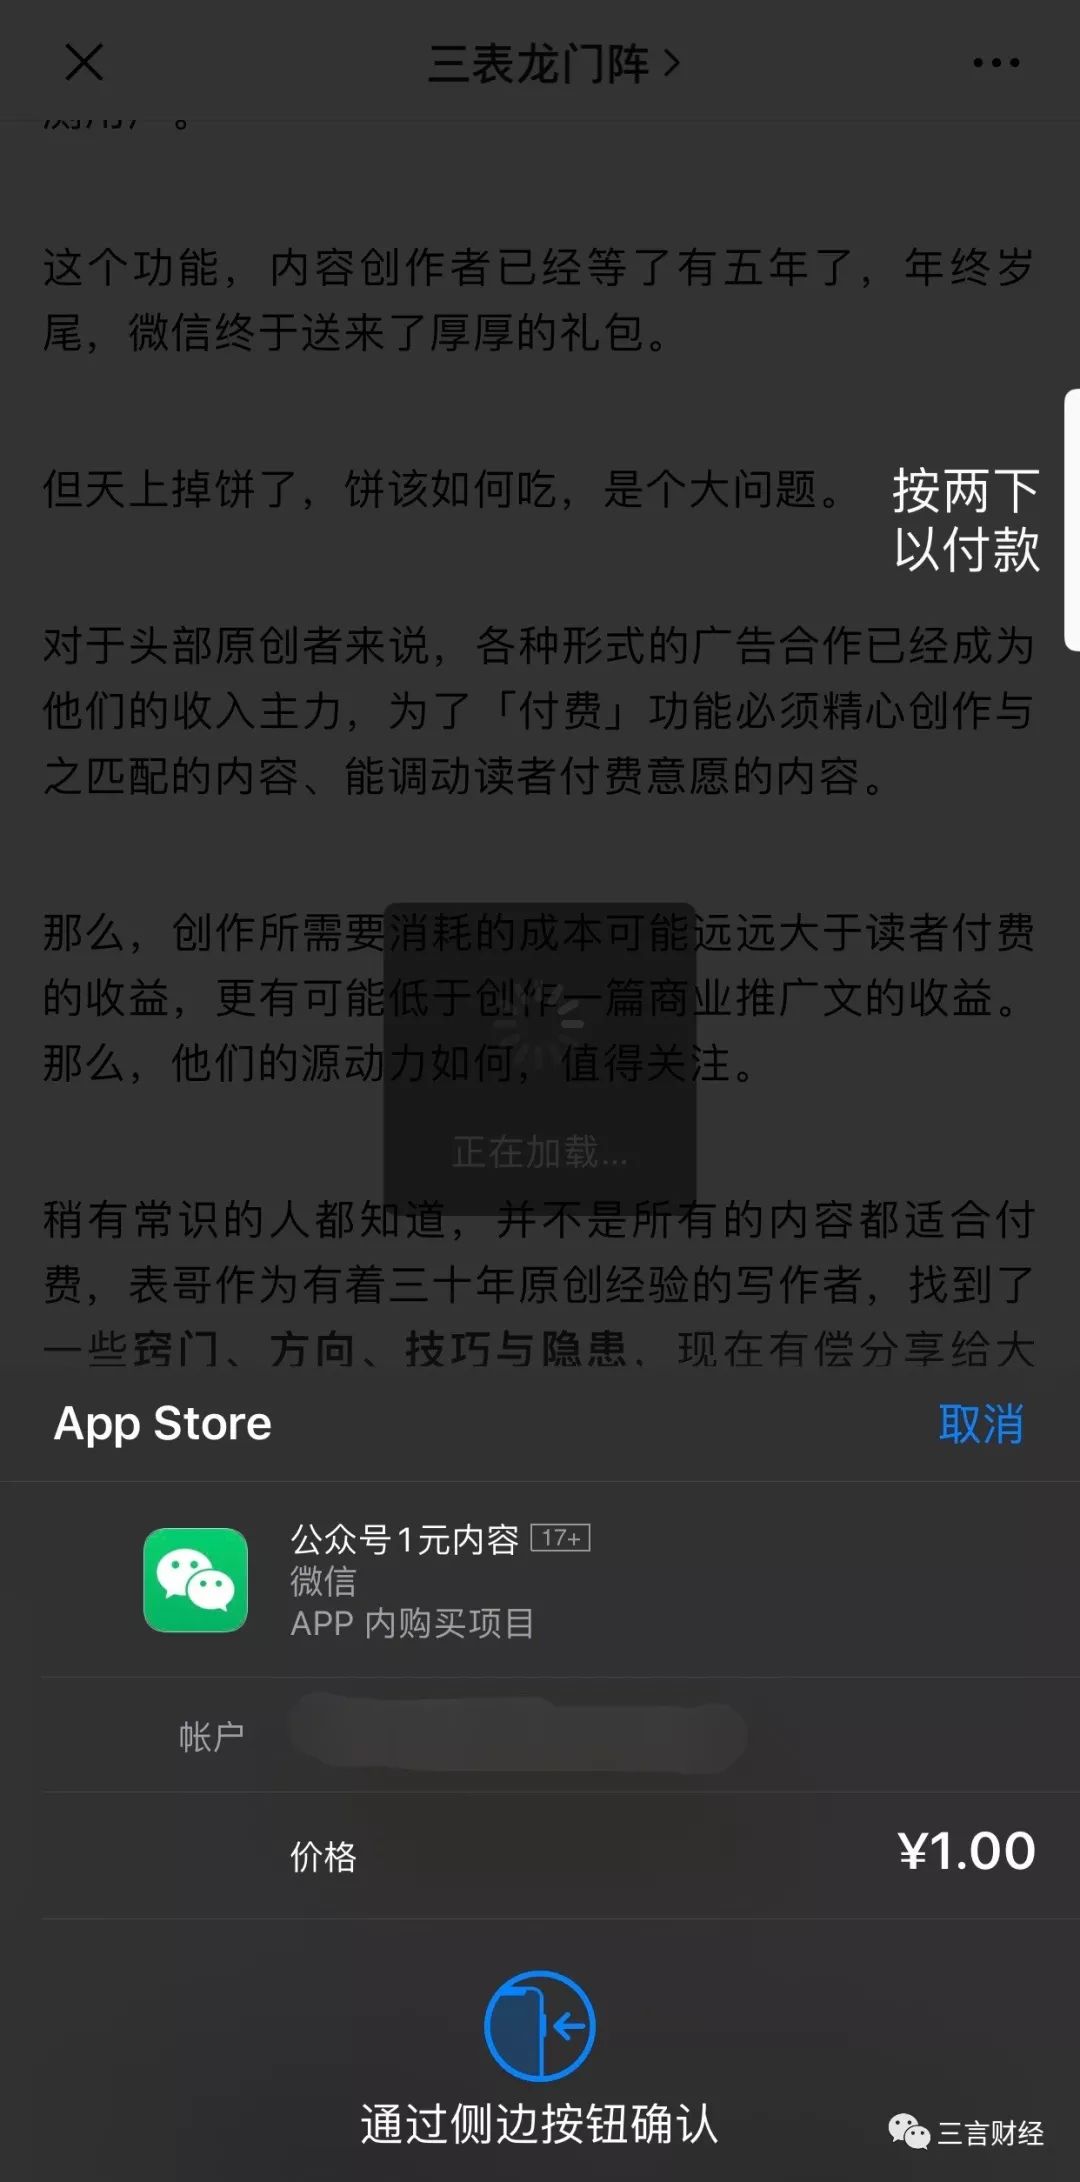 WeChat paid reading looks like this: no reading is displayed, you can leave a message after paying